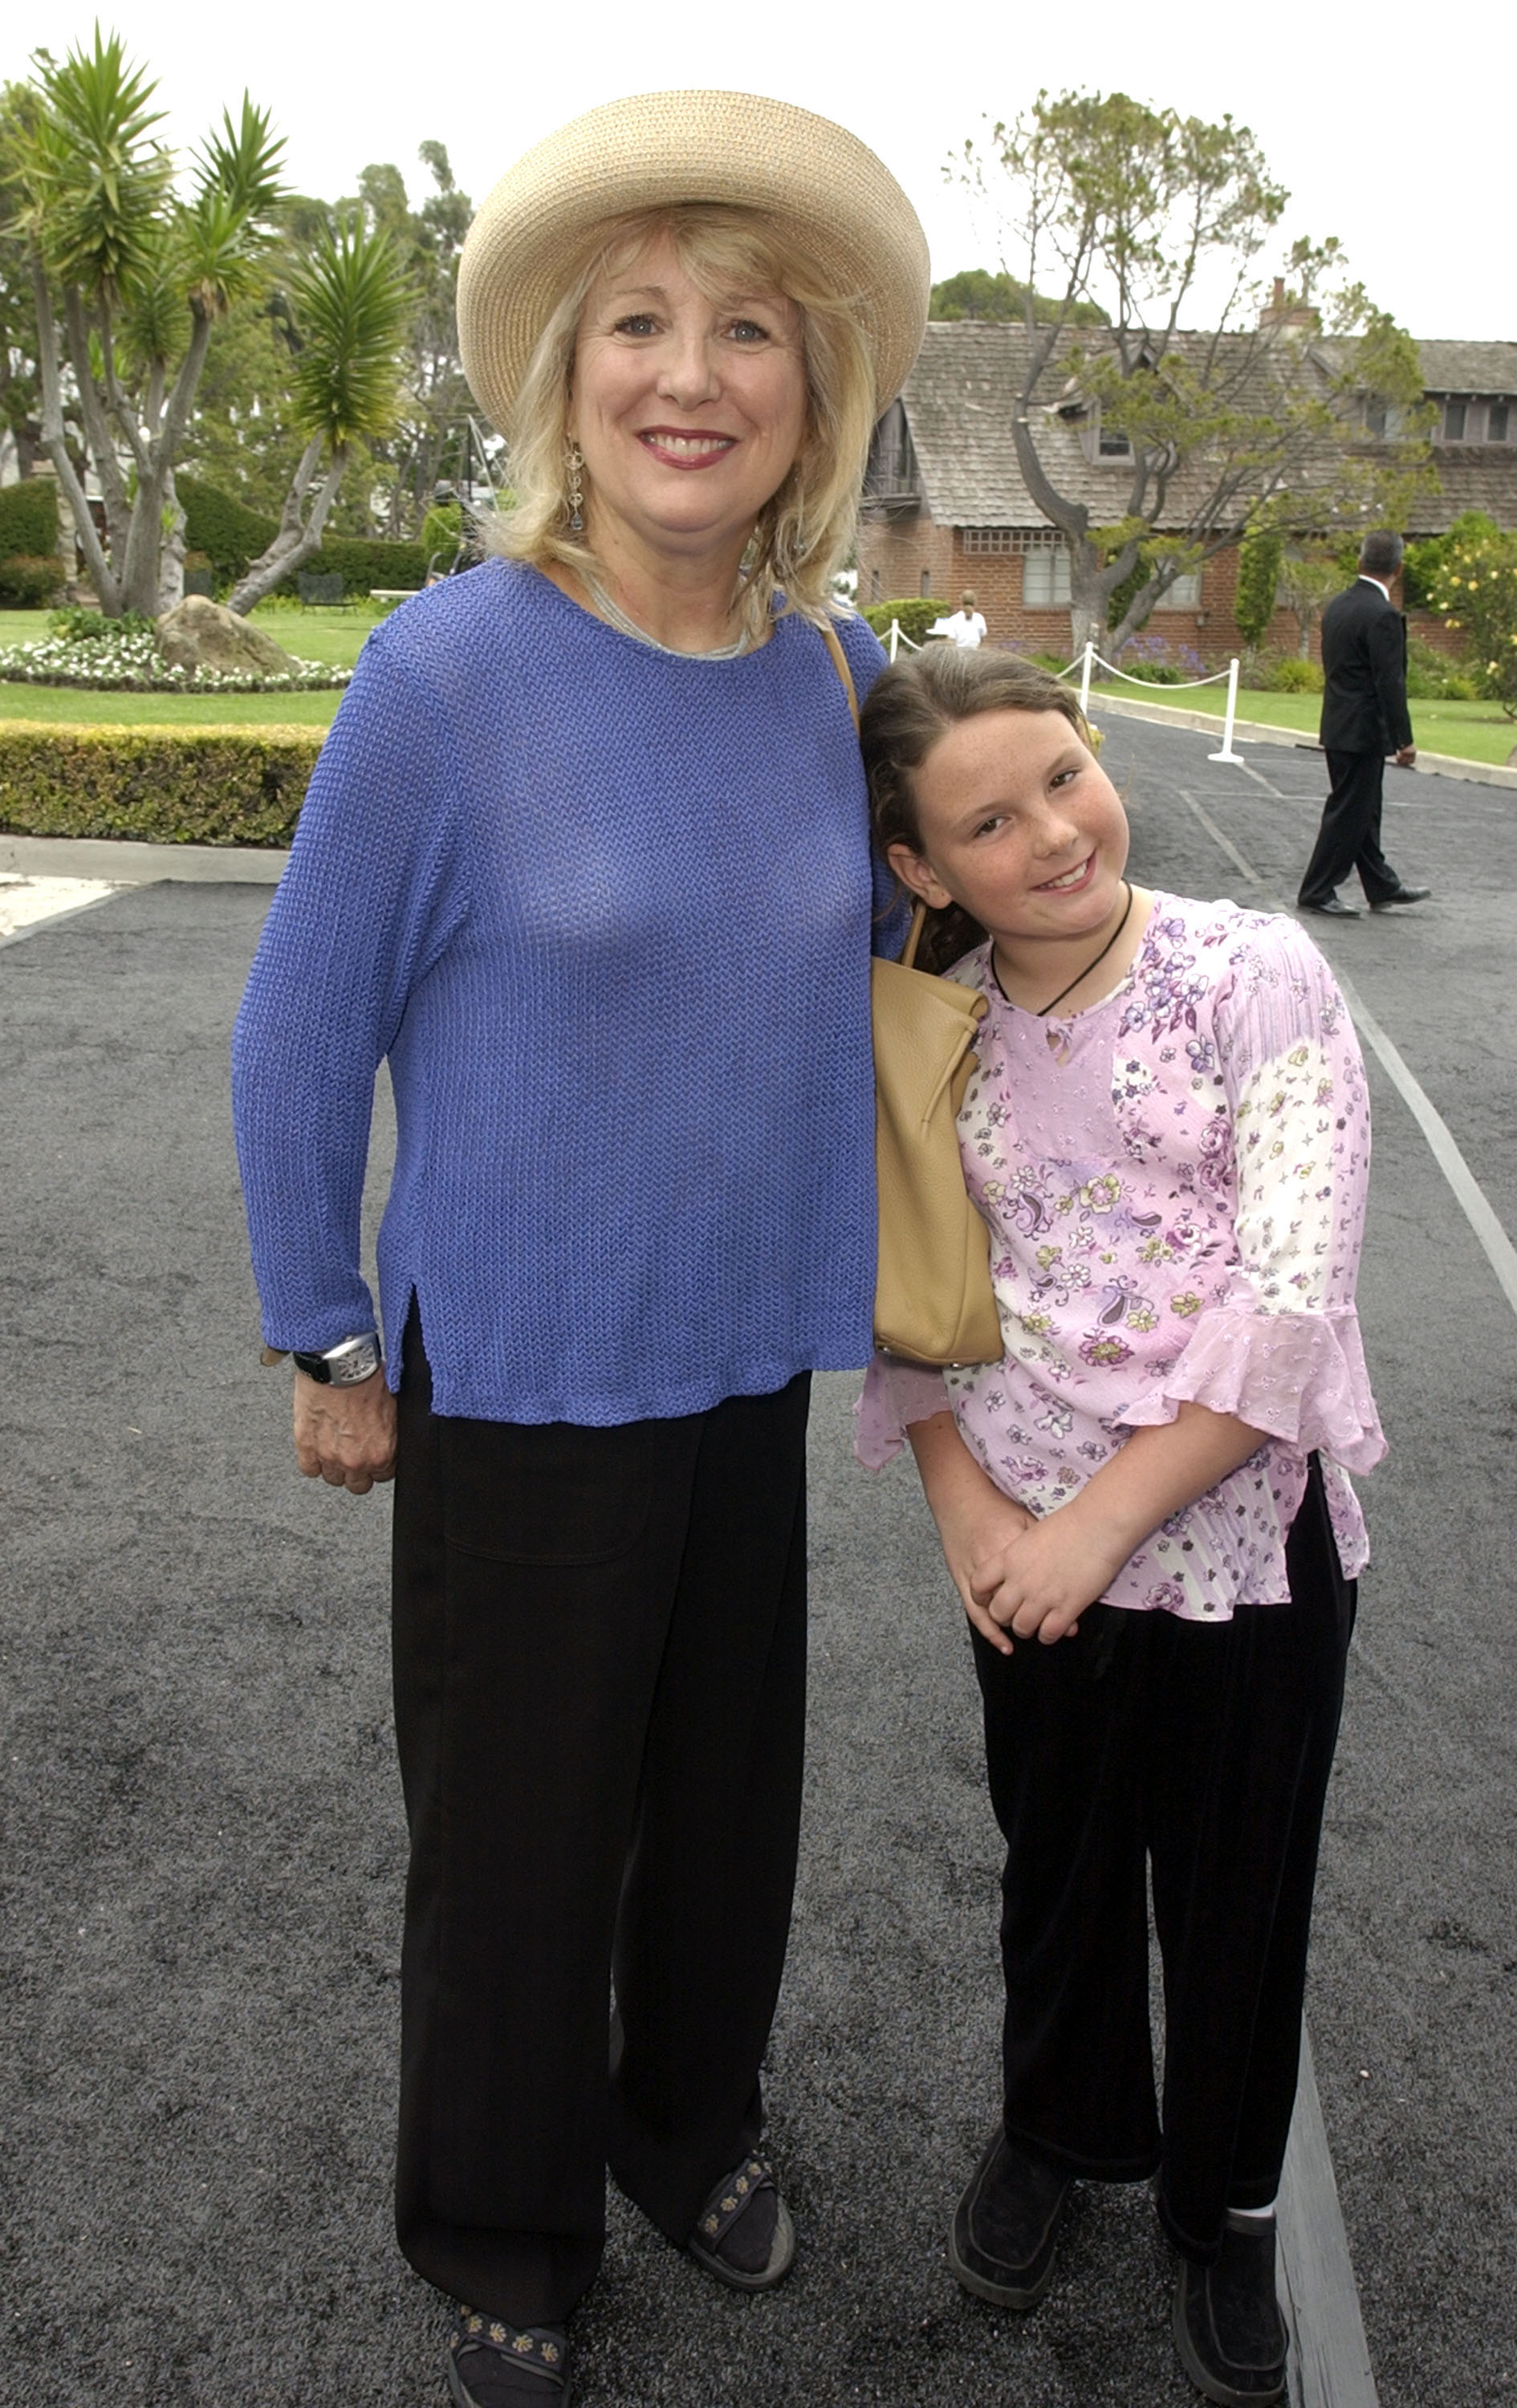 Teri Garr and Molly O'Neil during 6th Annual "QVC's Cure by the Shore" to Benefit the National Multiple Sclerosis Society at Private Residence in Malibu, California on May 17, 2003. | Source: Getty Images